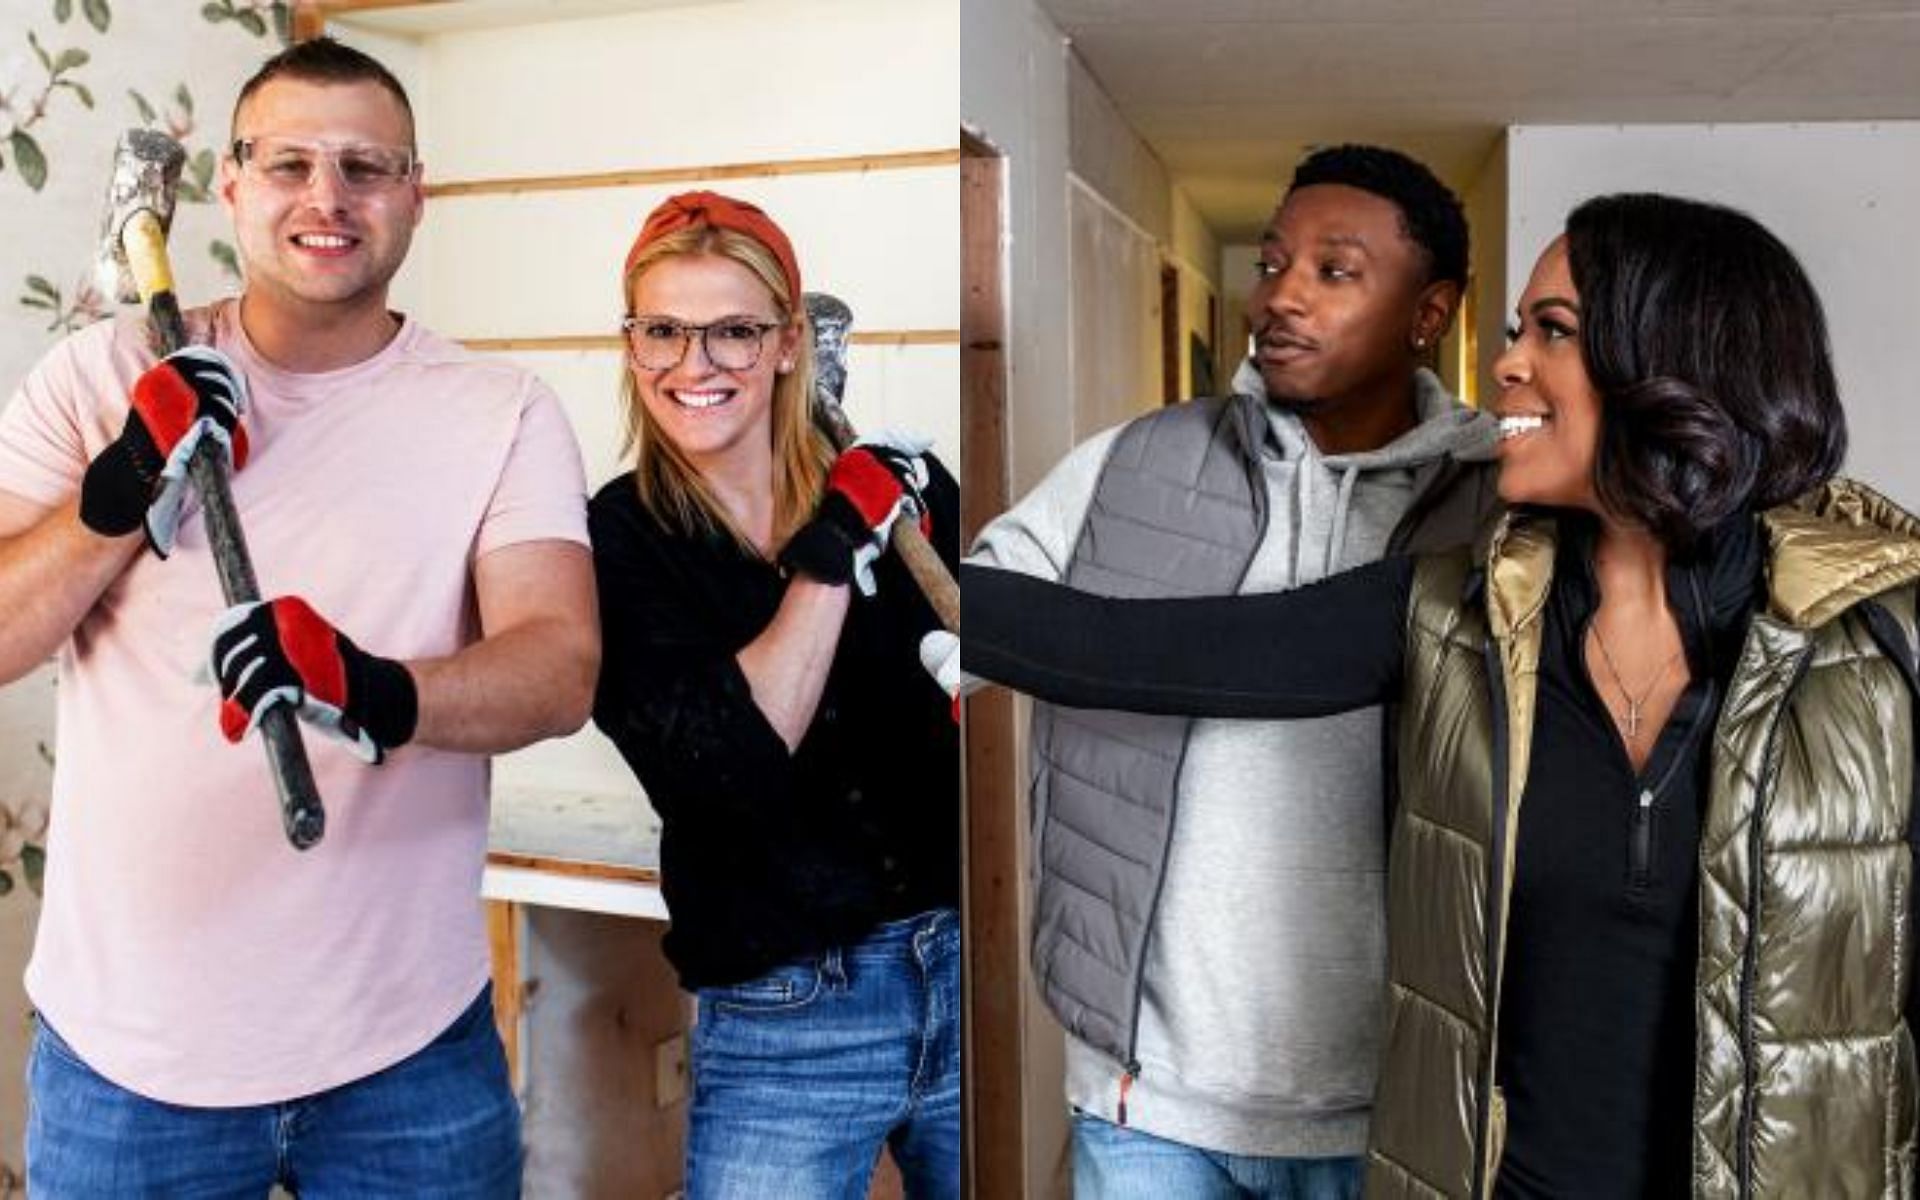 The Wrobel and Williams will take on the impossible house-flipping challenge (Images via HGTV)